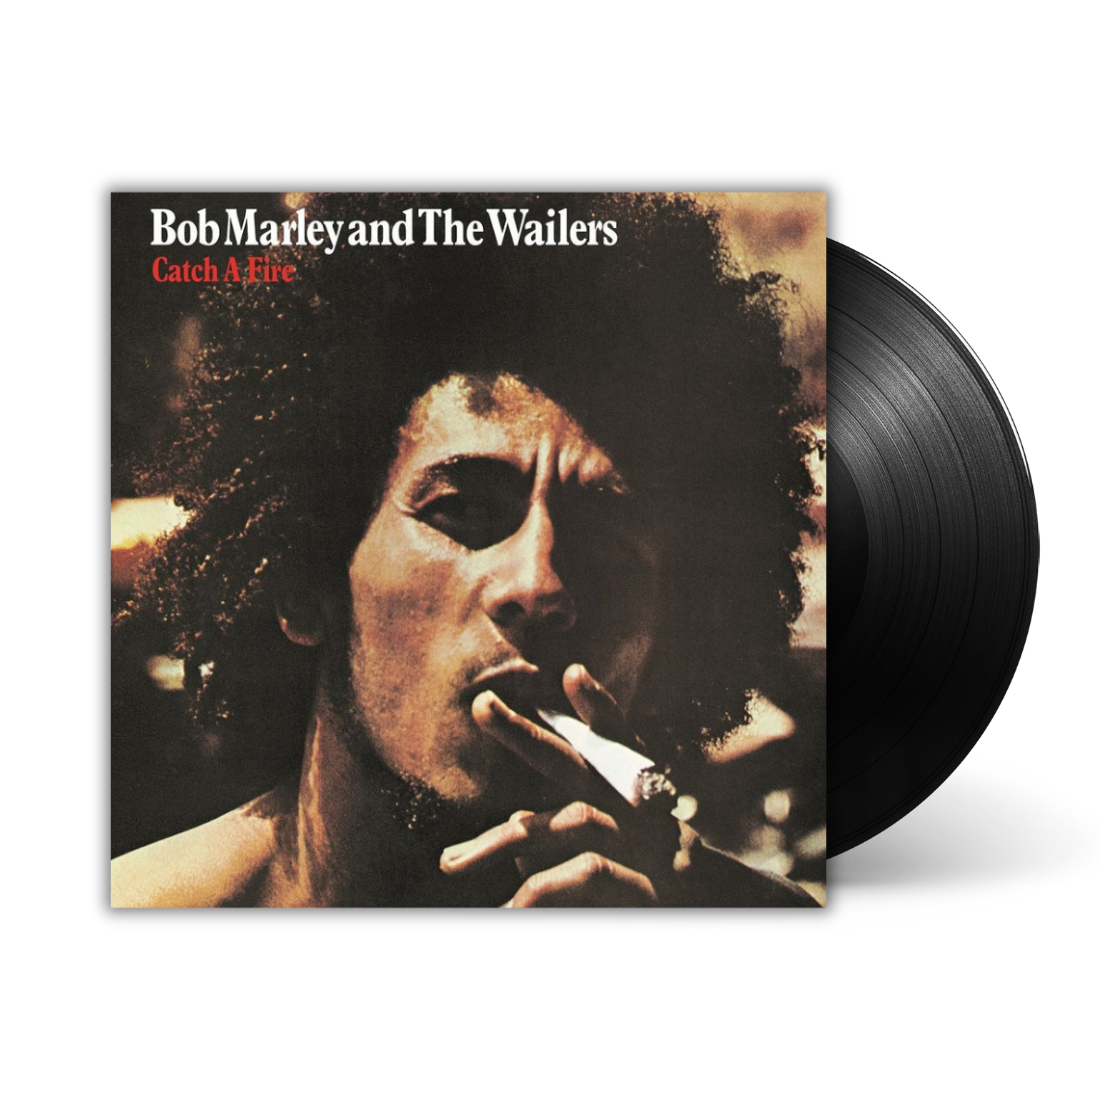 Bob Marley and The Wailers - Catch A Fire (Remastered)